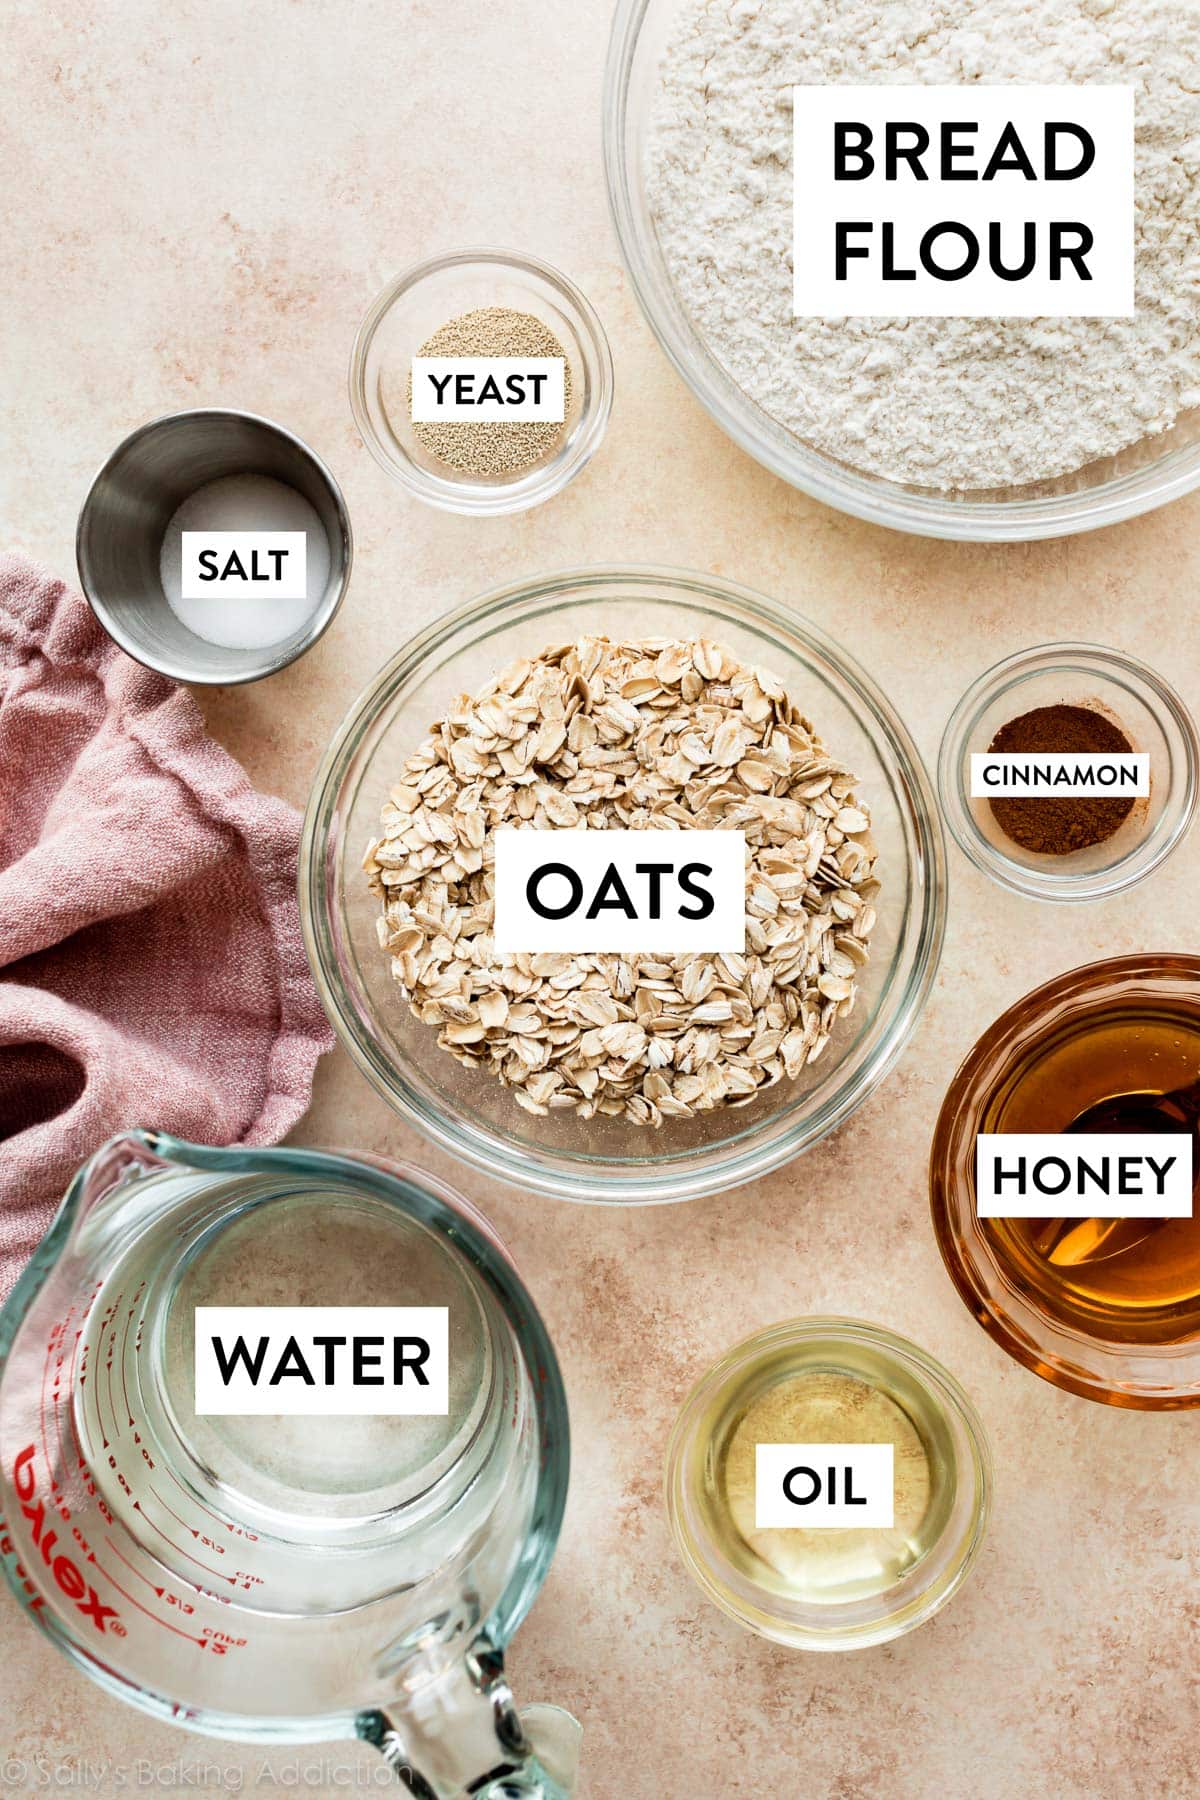 ingredients in bowls including honey, oats, yeast, salt, cinnamon, and bread flour